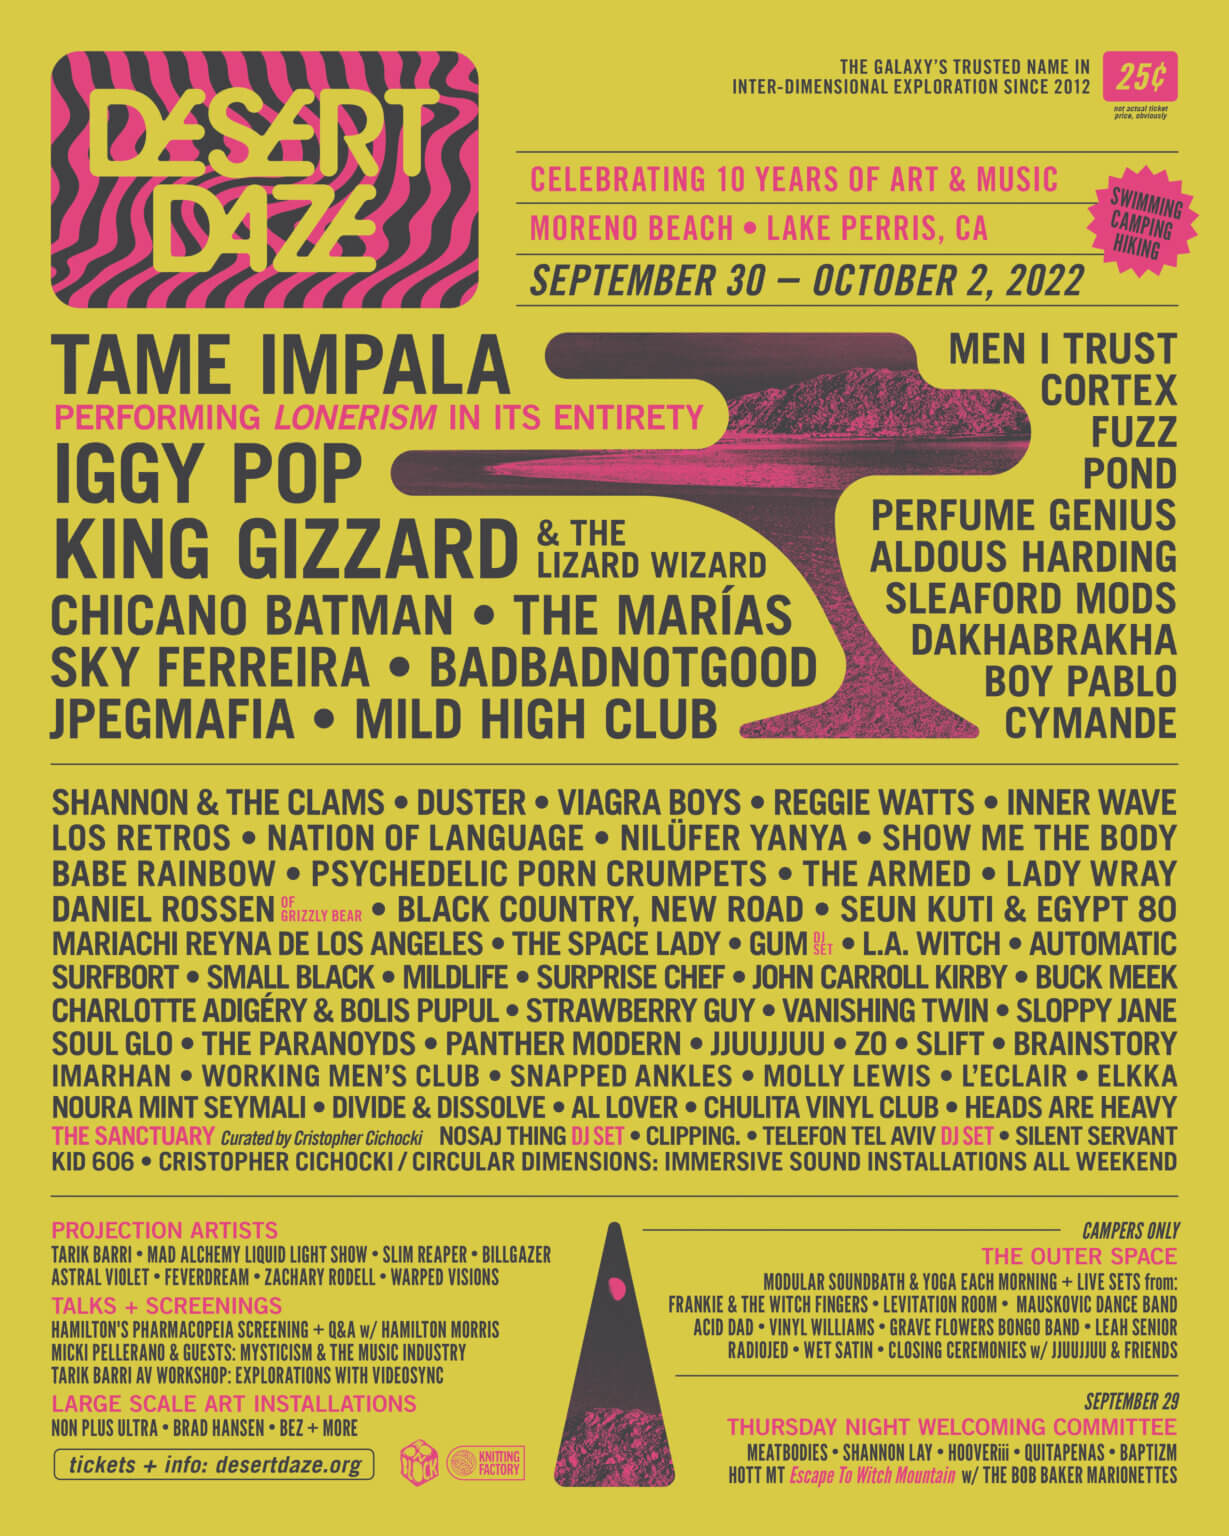 Desert Daze 2022 has announced their their tenth anniversary Lineup. This year will feature Tame Impala, Iggy Pop, Men I Trust and many more